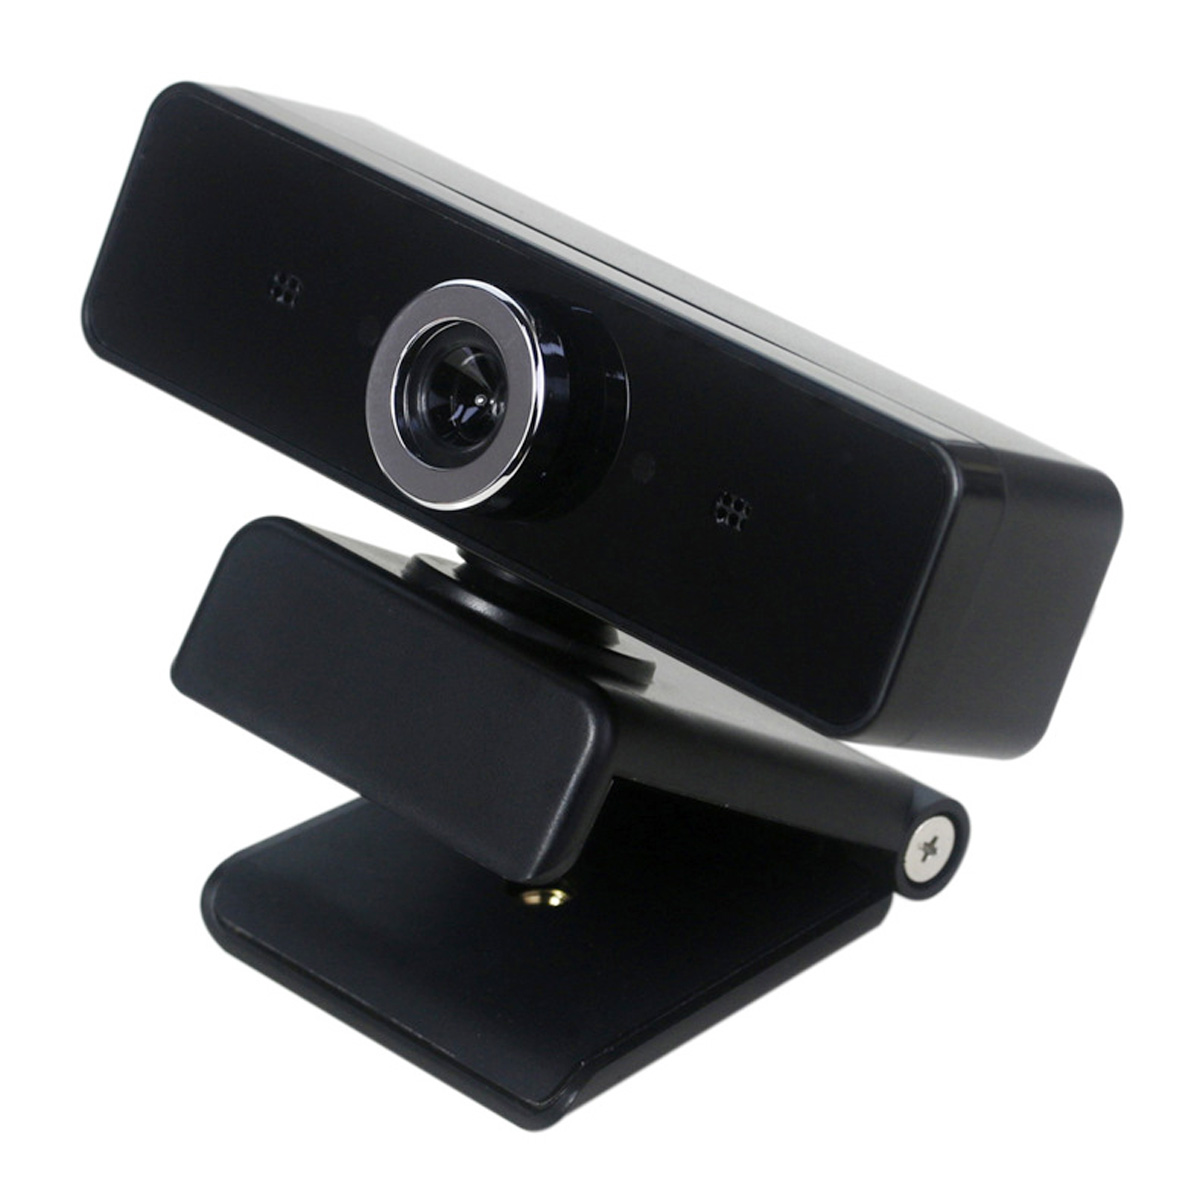 Avanc-HD-720P-USB-Webcam-with-Microphone-for-PC-Laptop-1681643-9